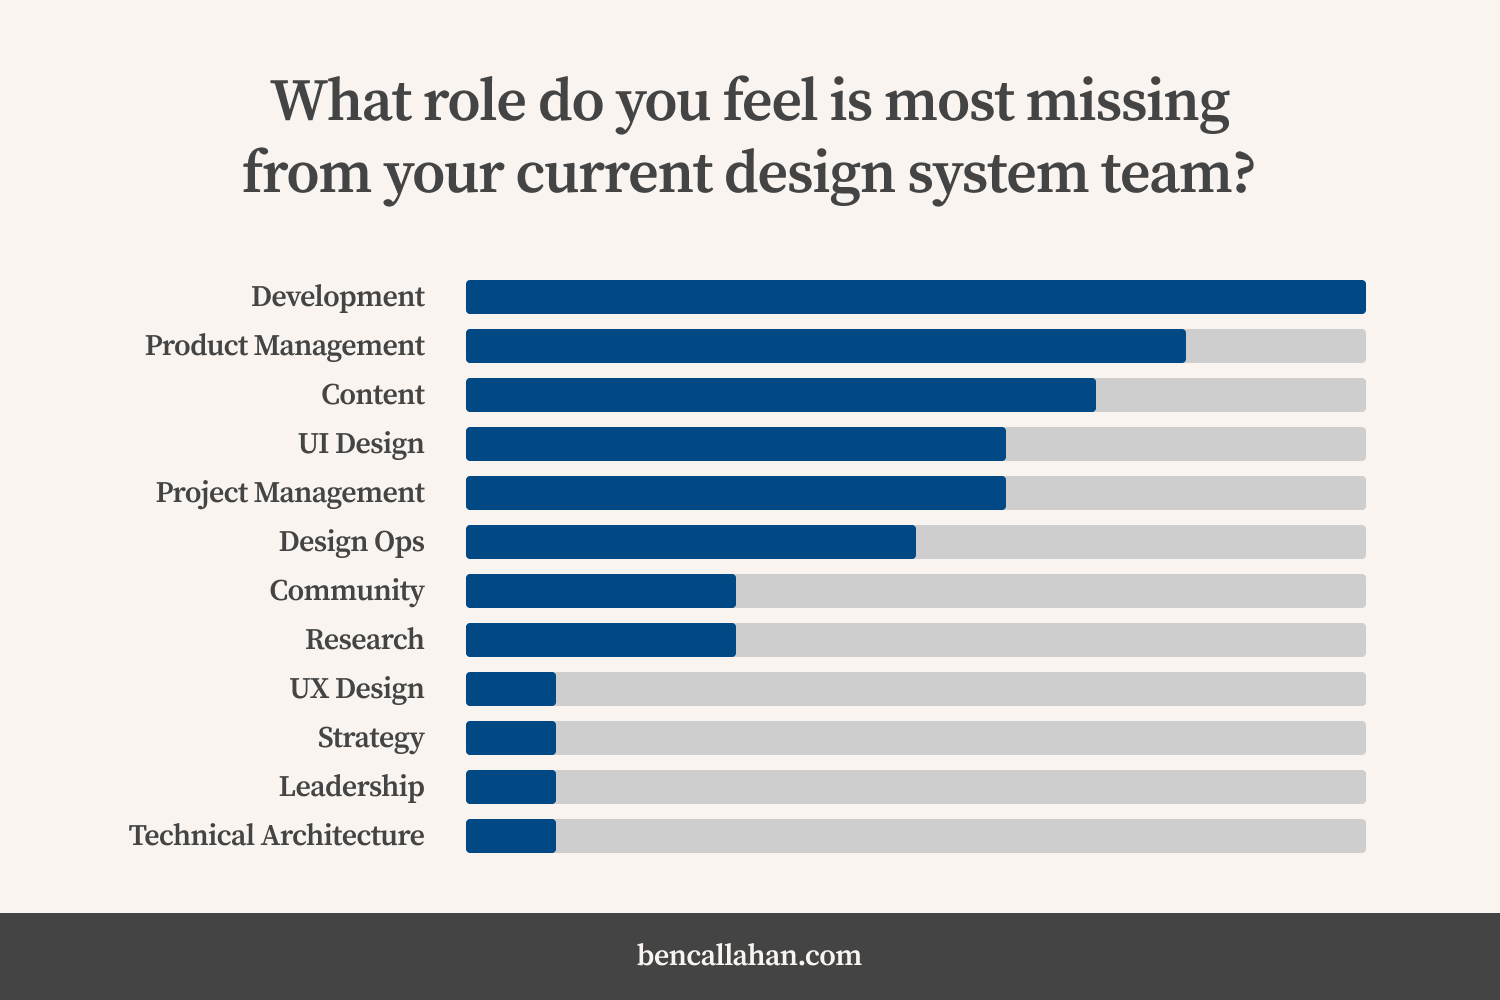 In response to the question, “What role do you feel is most missing from your current design system team?”: I saw a variety of answers with development, product management, content, UI design, project management, and design ops making up the majority.